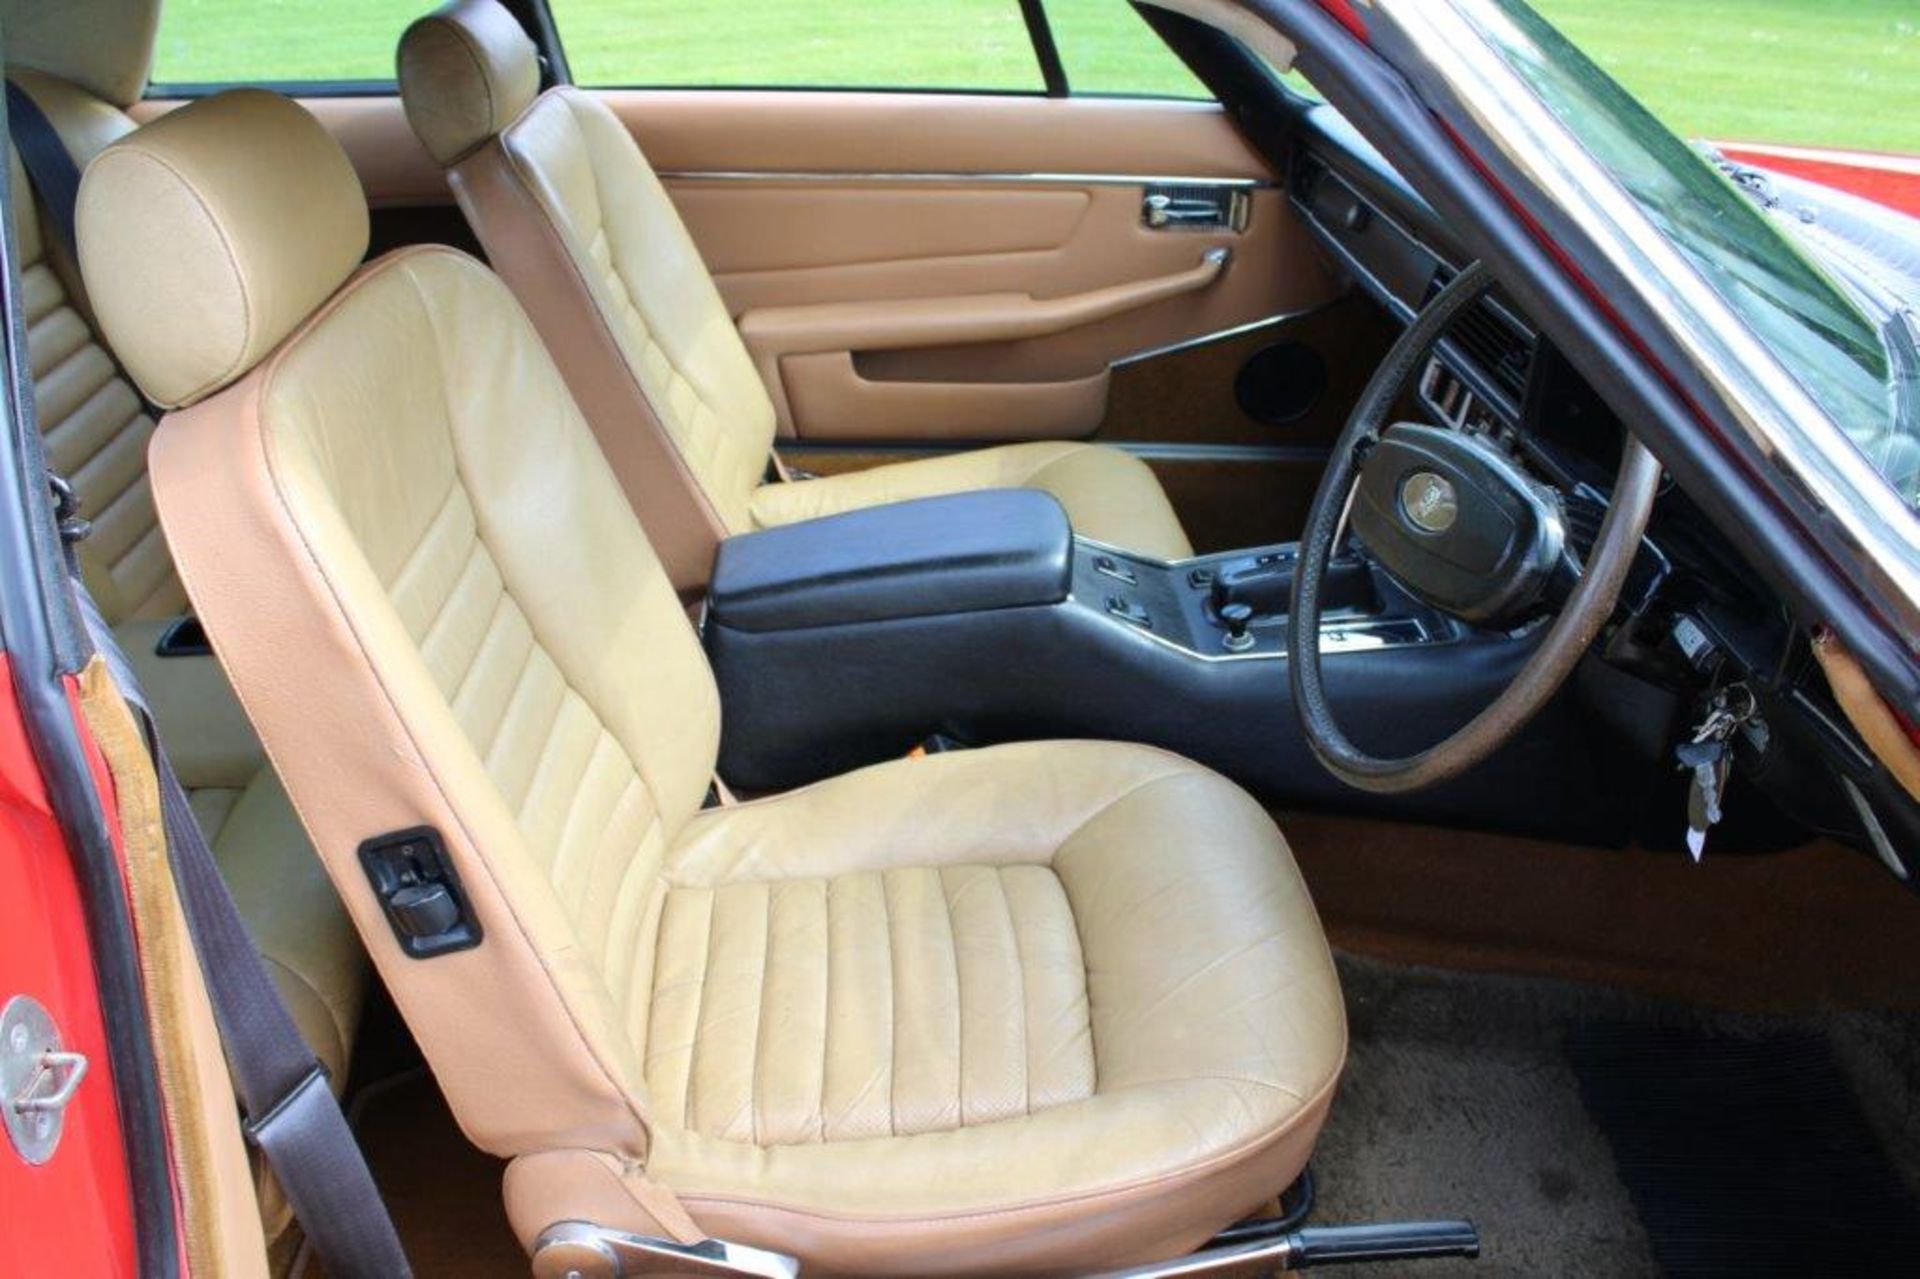 1976 Jaguar XJ-S 5.3 V12 Coupe Auto 29,030 miles from new - Image 14 of 28